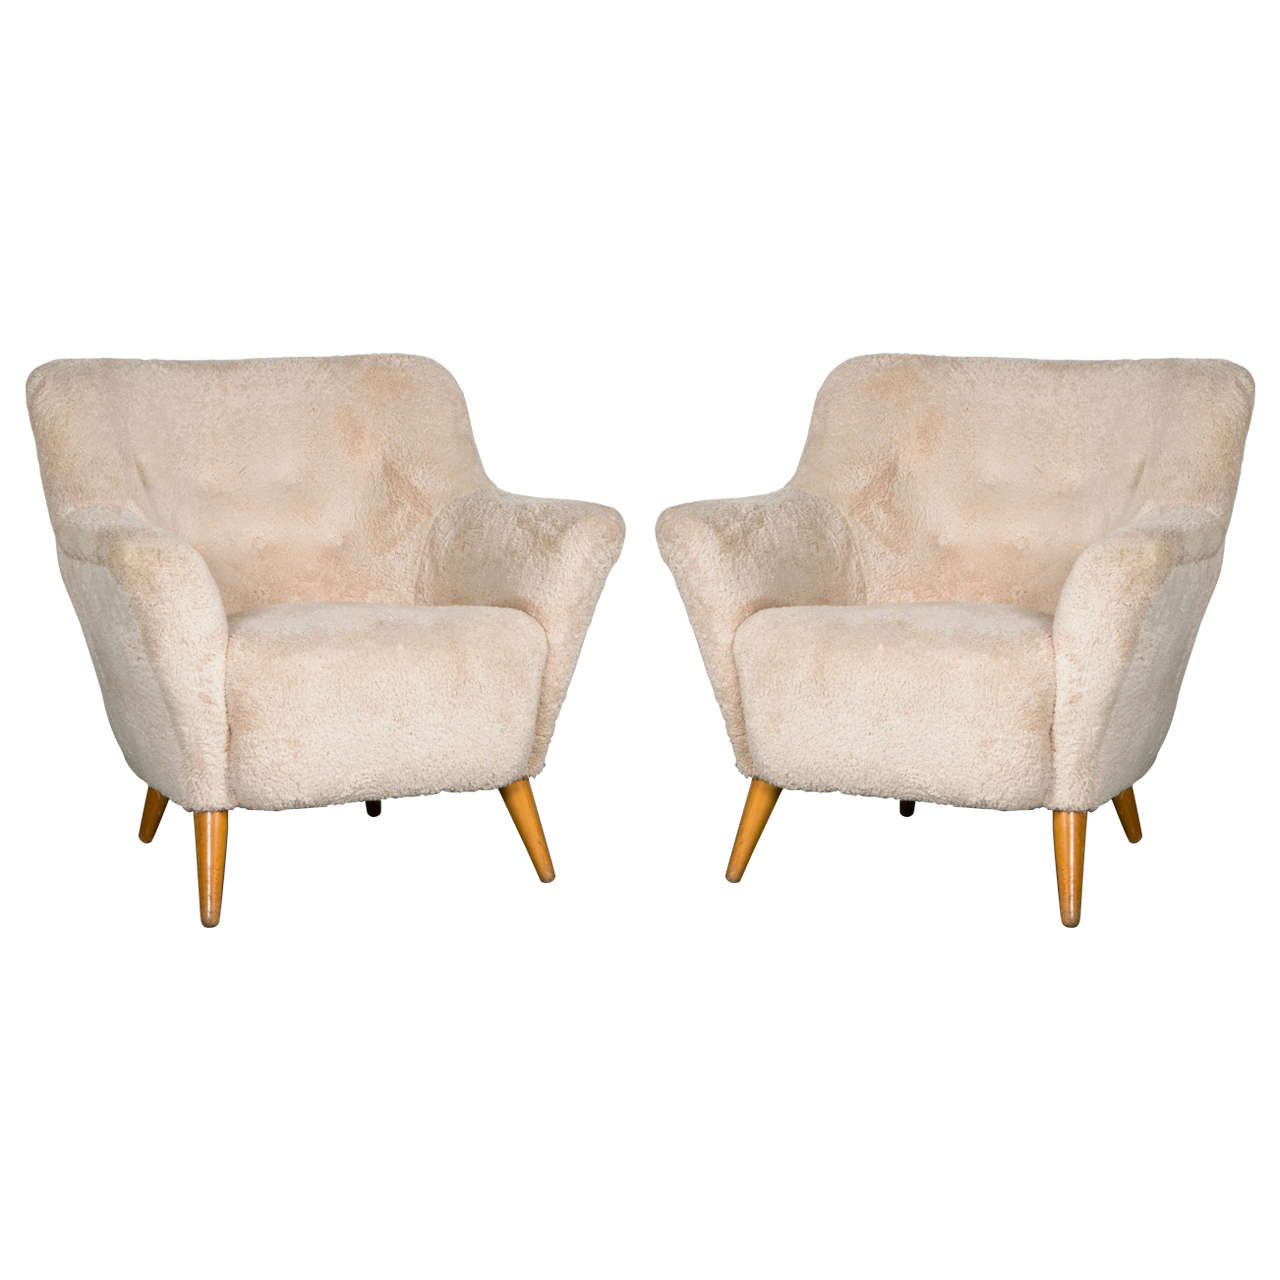 Flemming Lassen Pair of Armchairs, circa 1940 For Sale